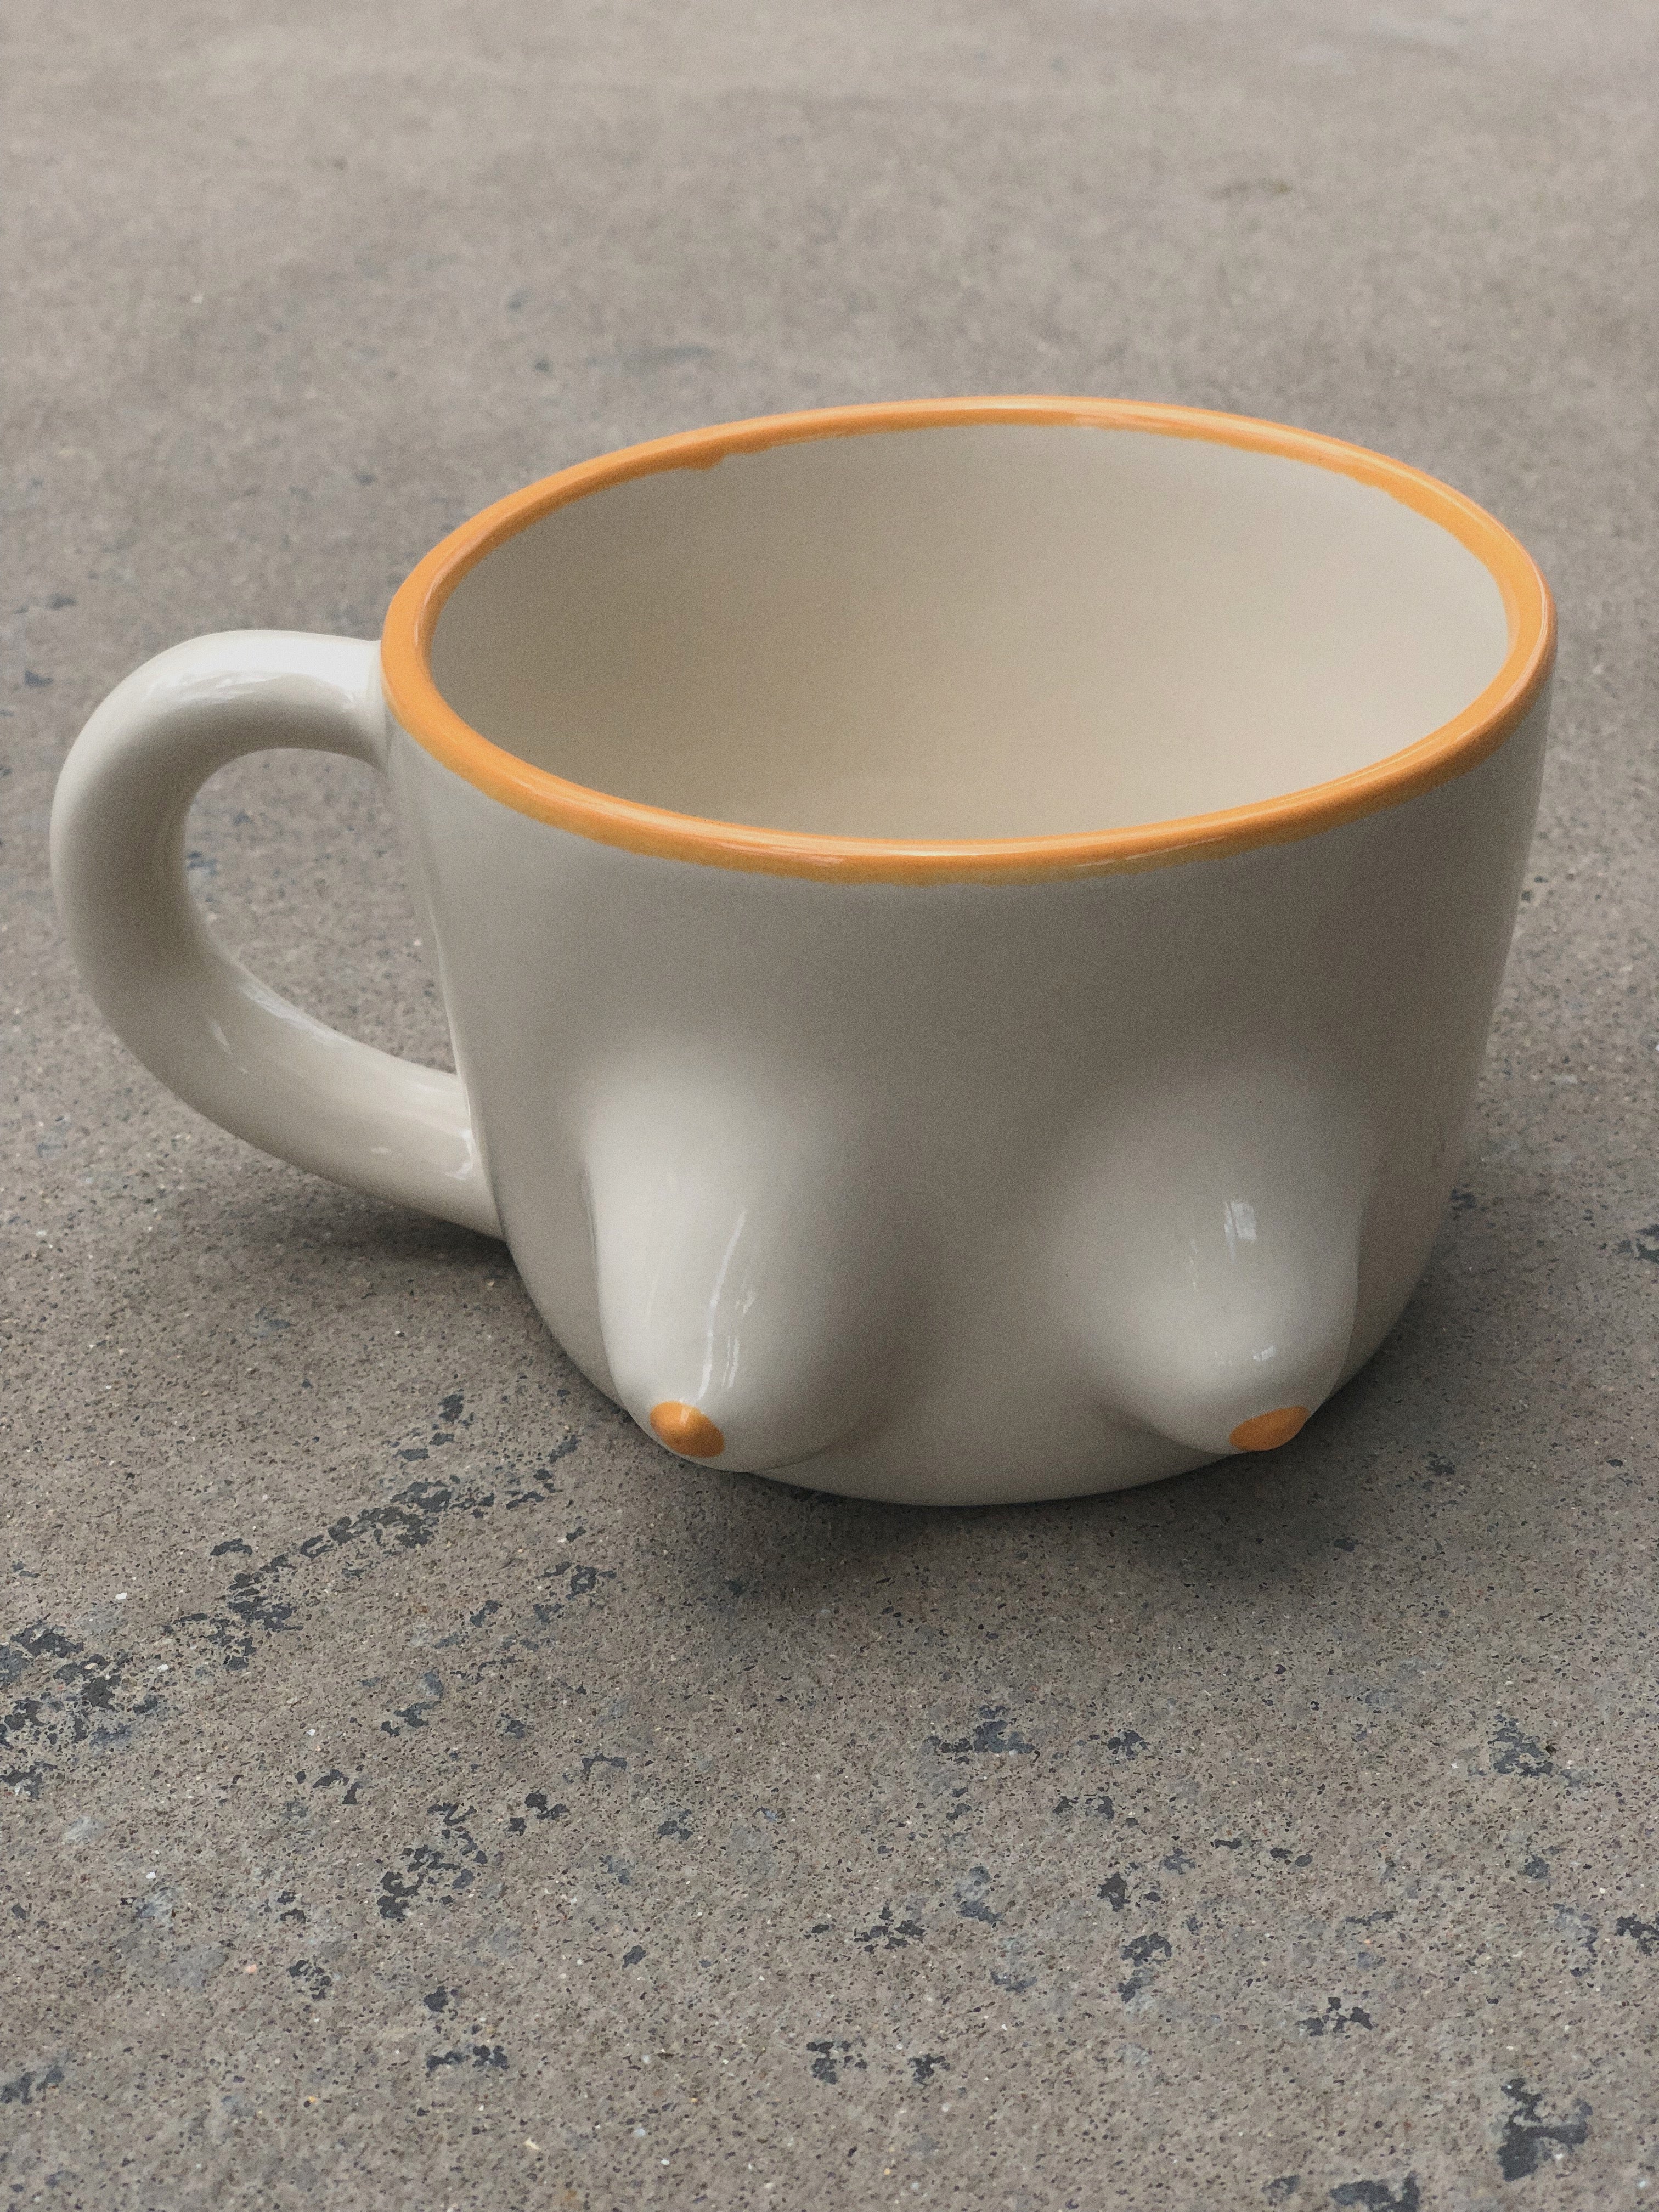 Boobie Cup was $95 now $66.50